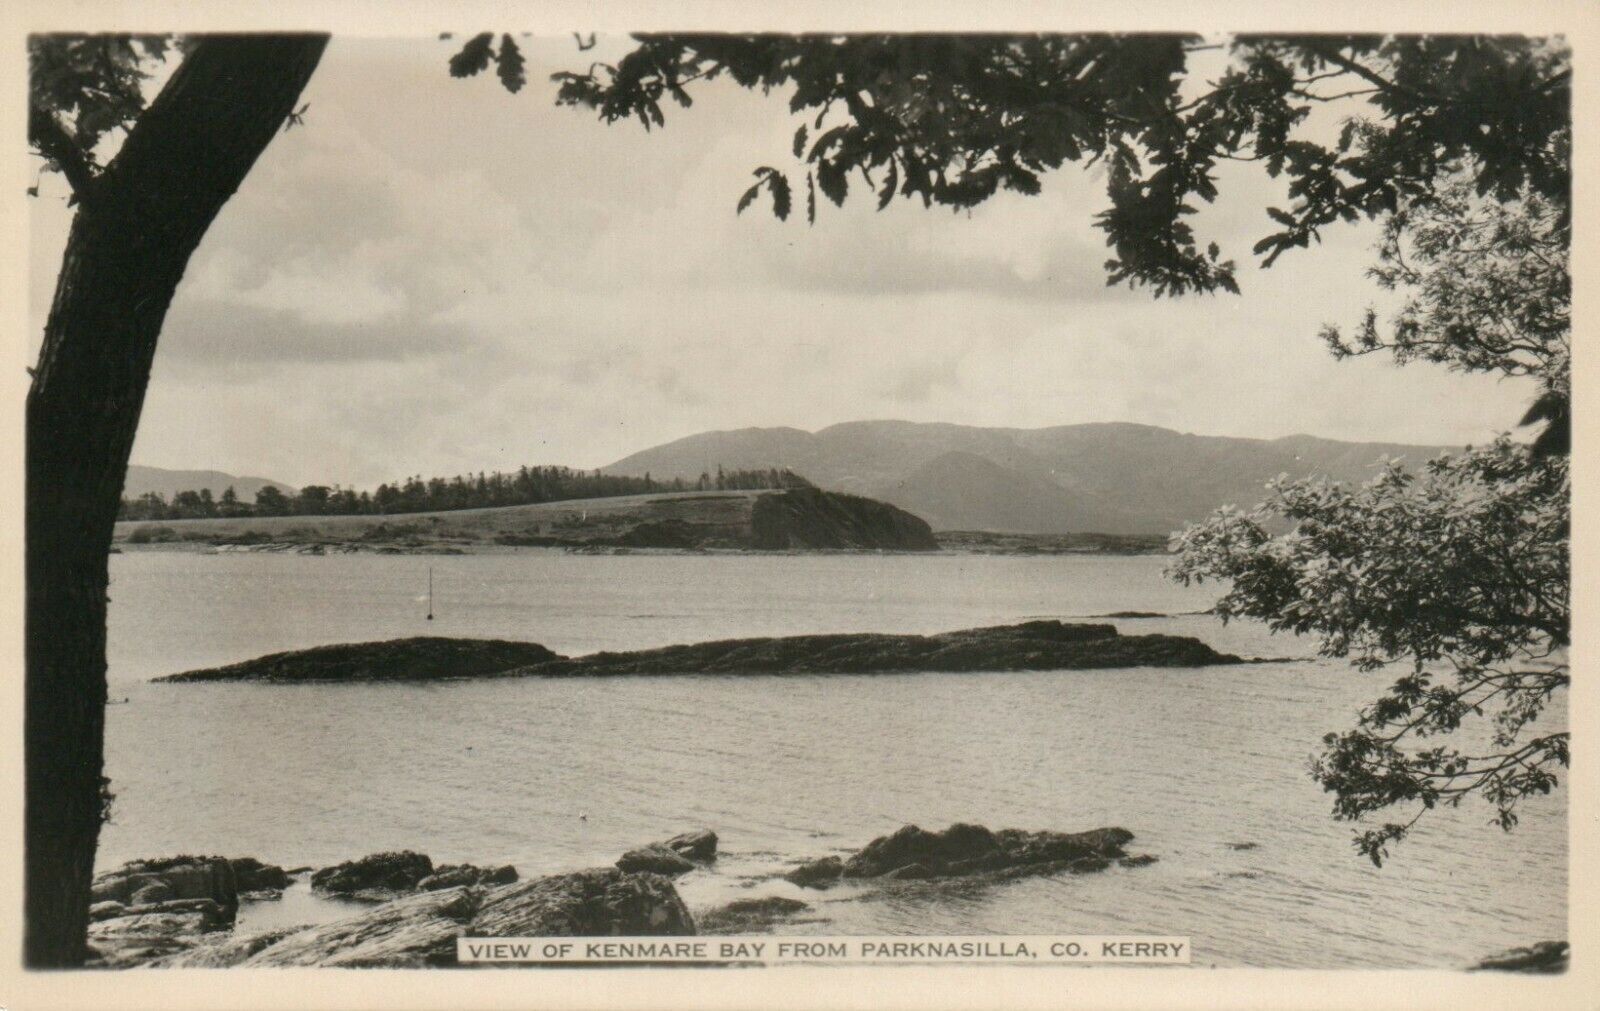 View of Kenmare Bay From Parknasilla Co. Kerry Real Photo Poster painting RPPC Postcard